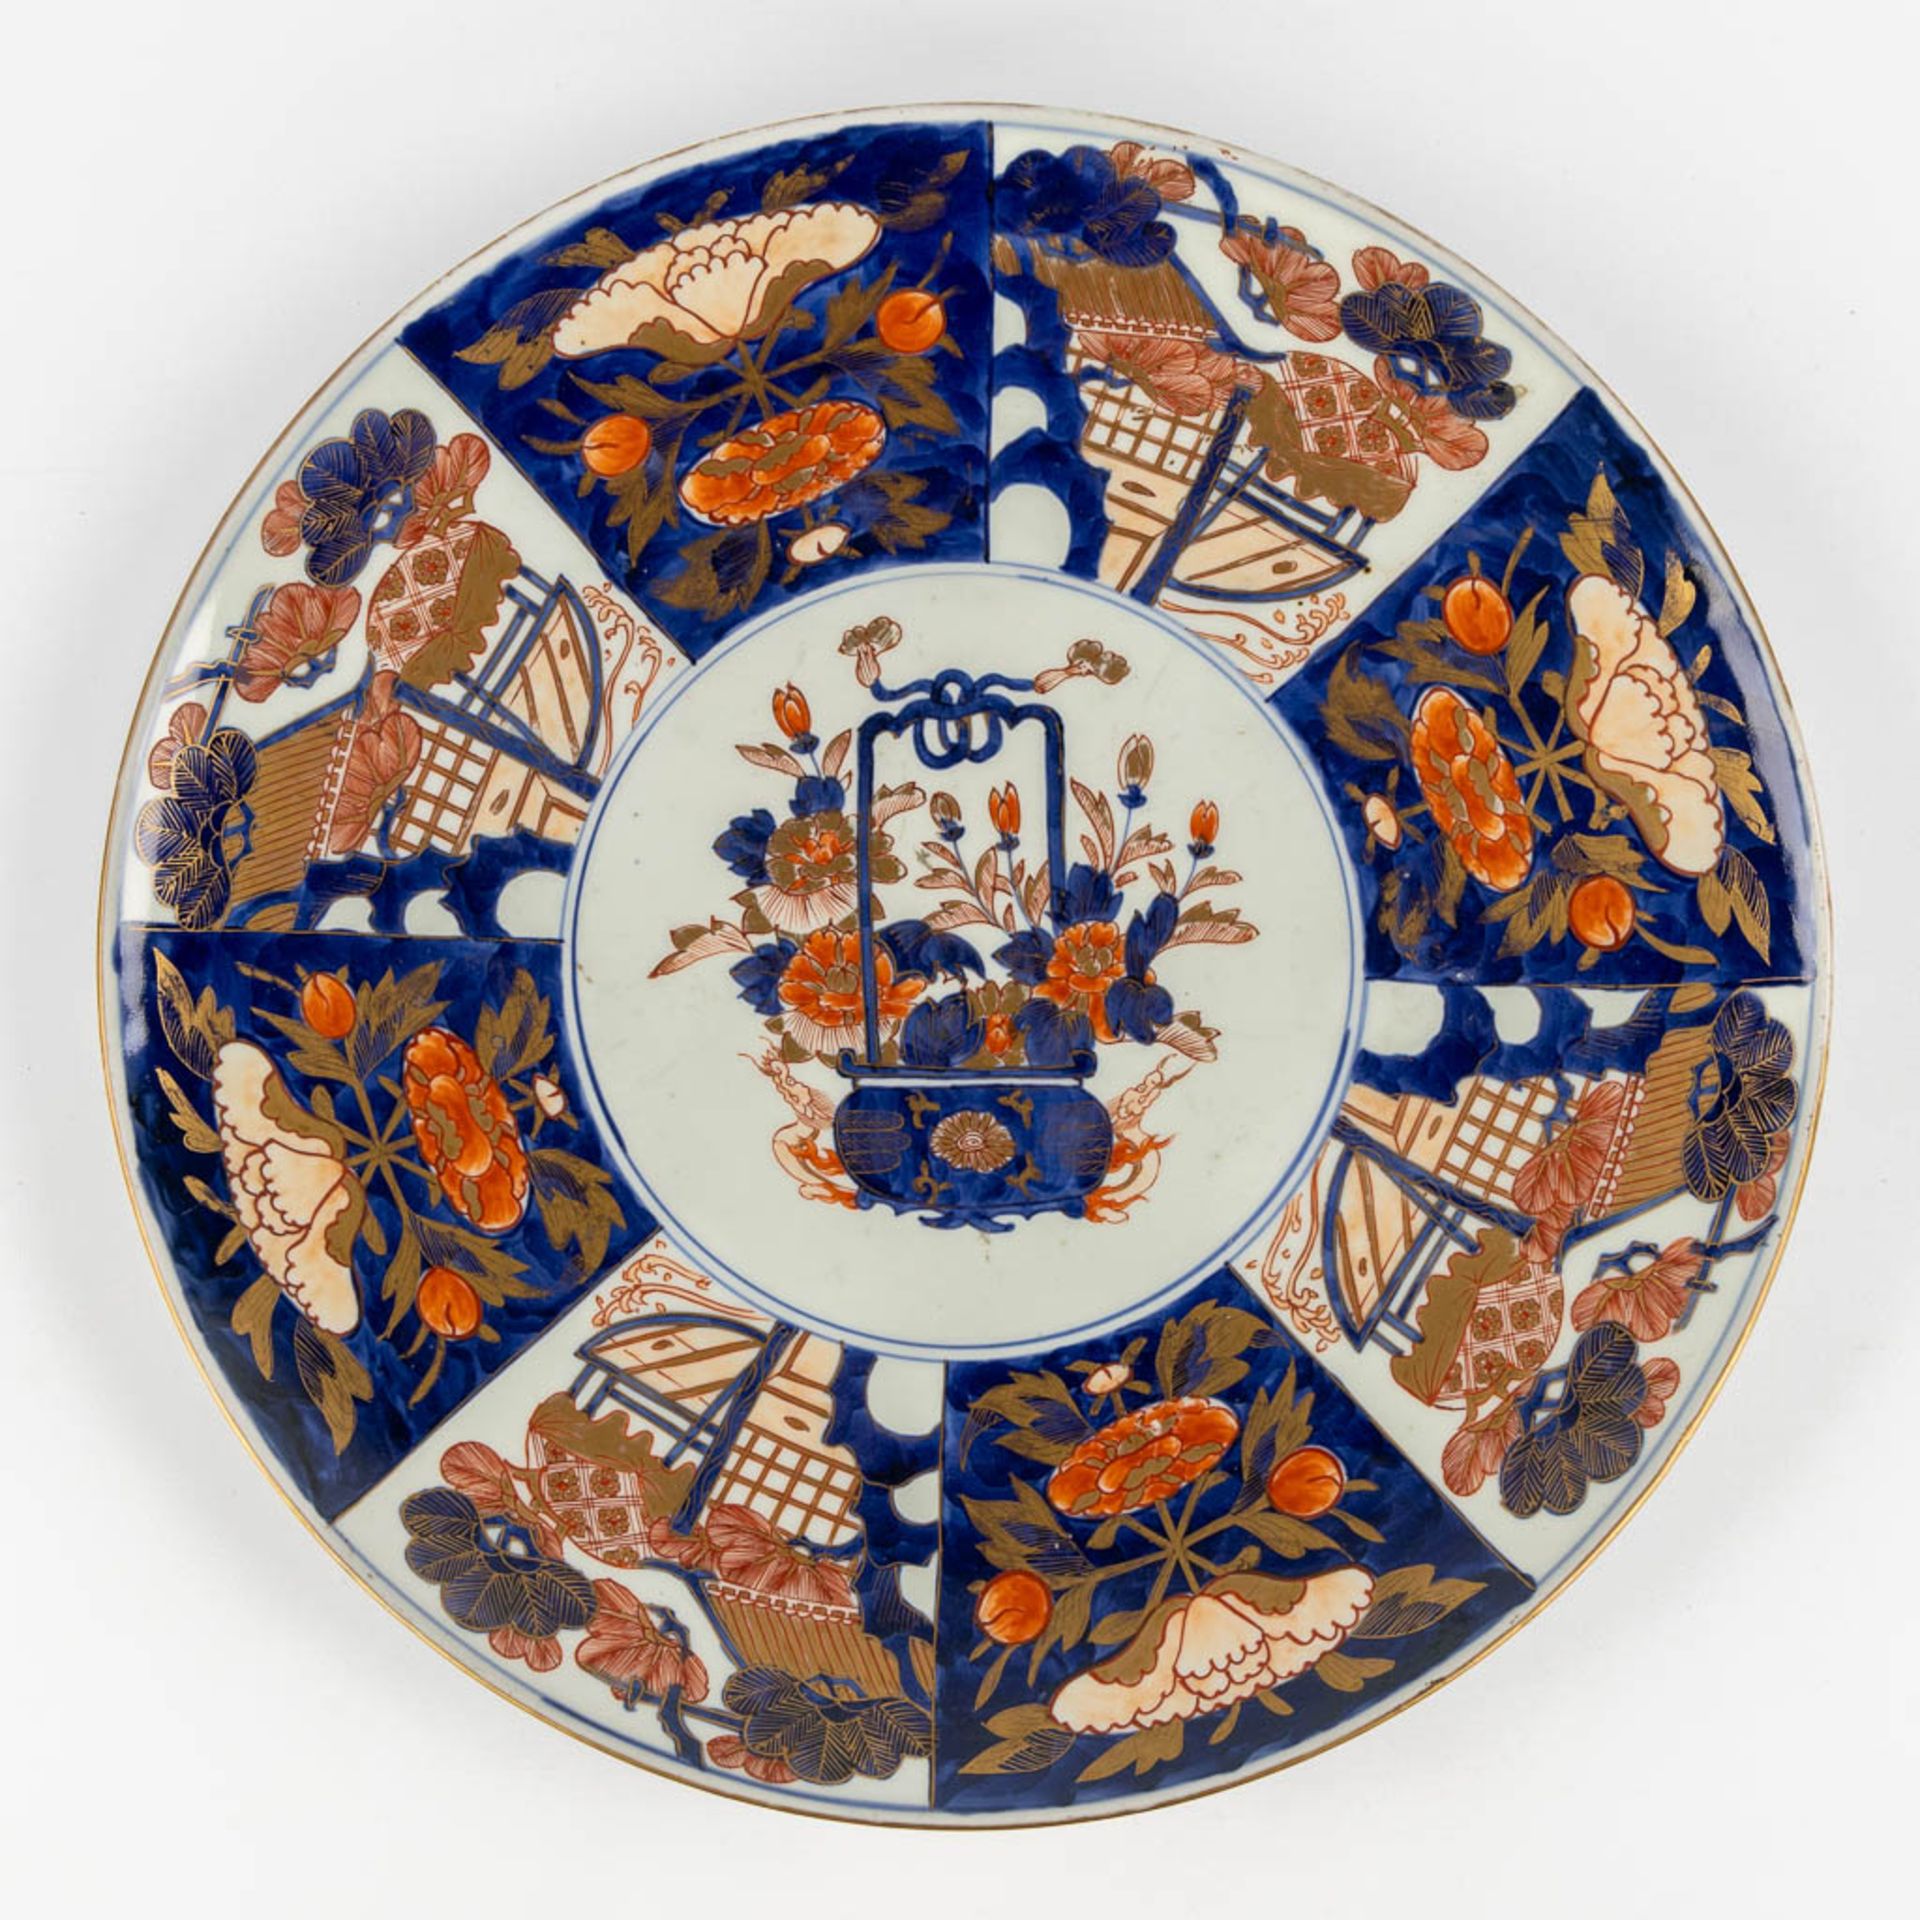 A pair of large Japanese Imari plates, 19th/20th C. (D:47 cm) - Image 8 of 13